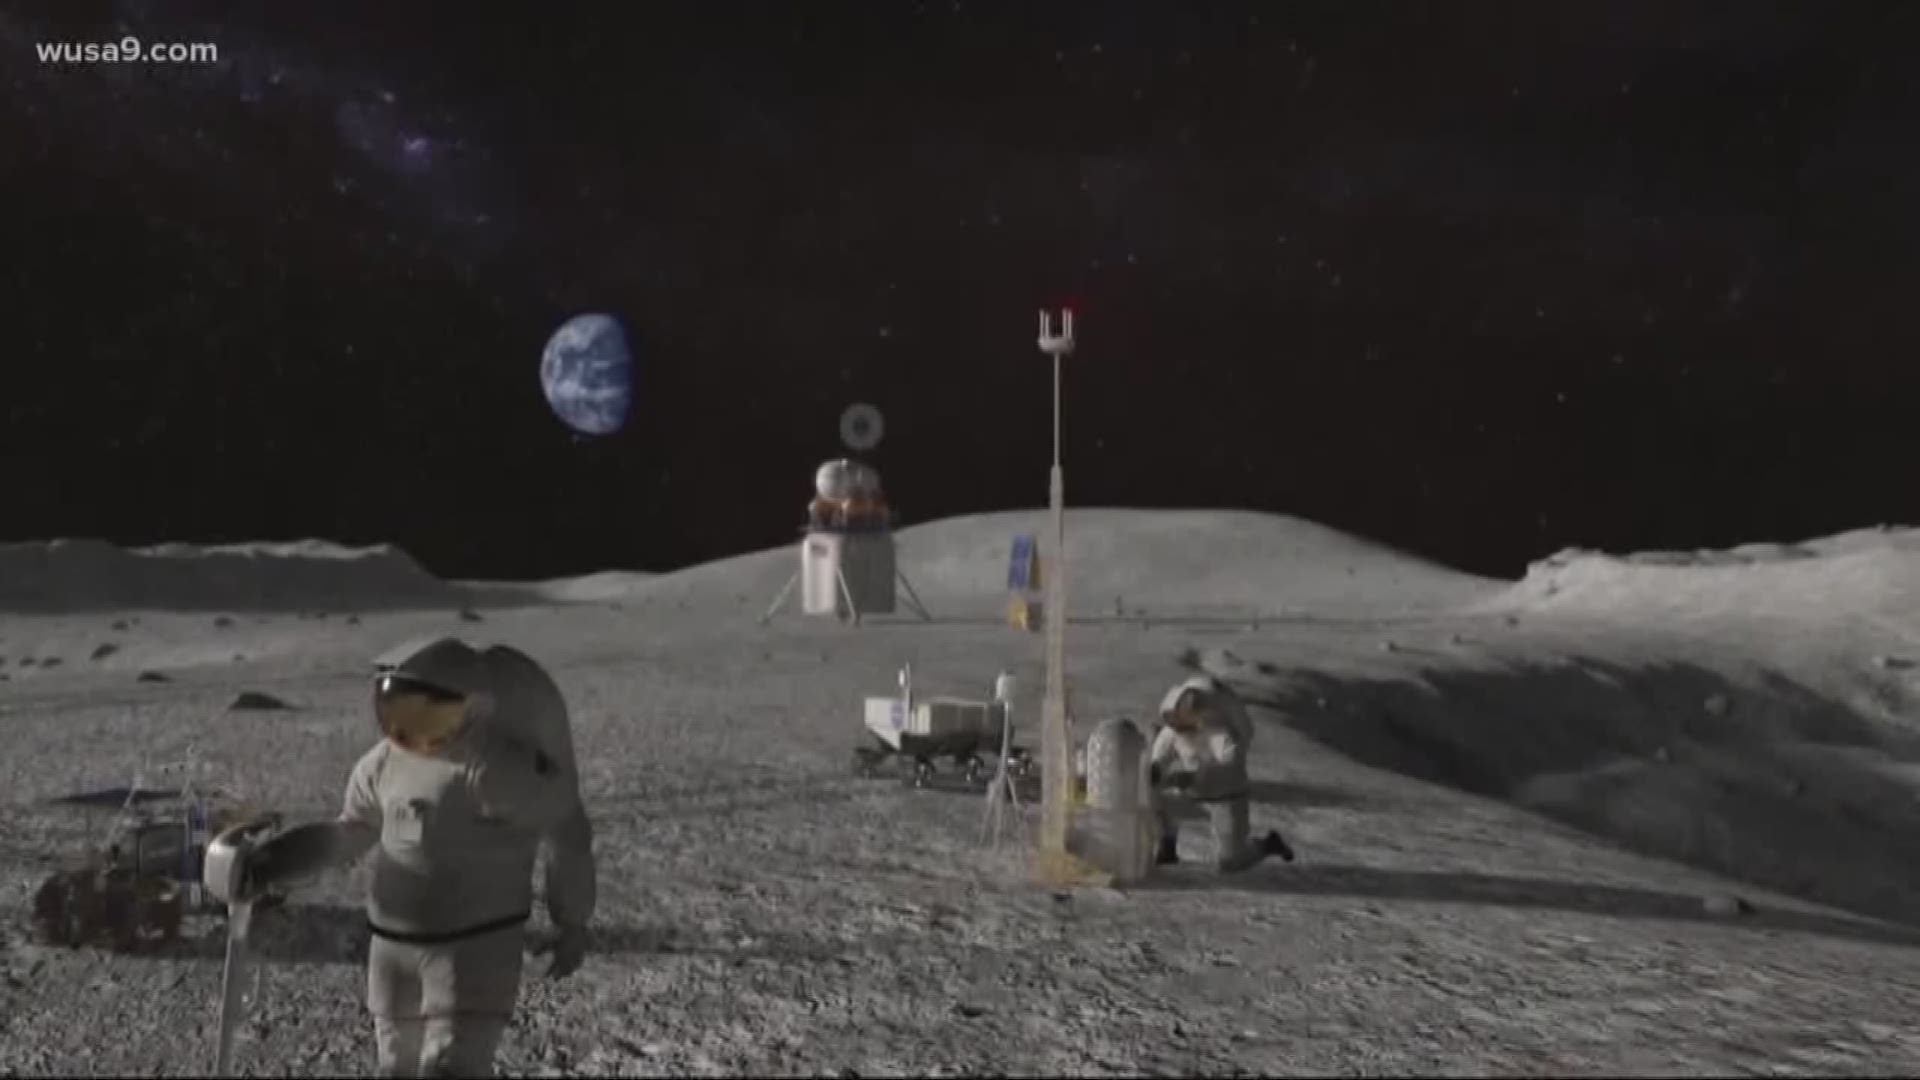 All 12 astronauts who walked on the moon were men. NASA's Artemis program aims to change that.